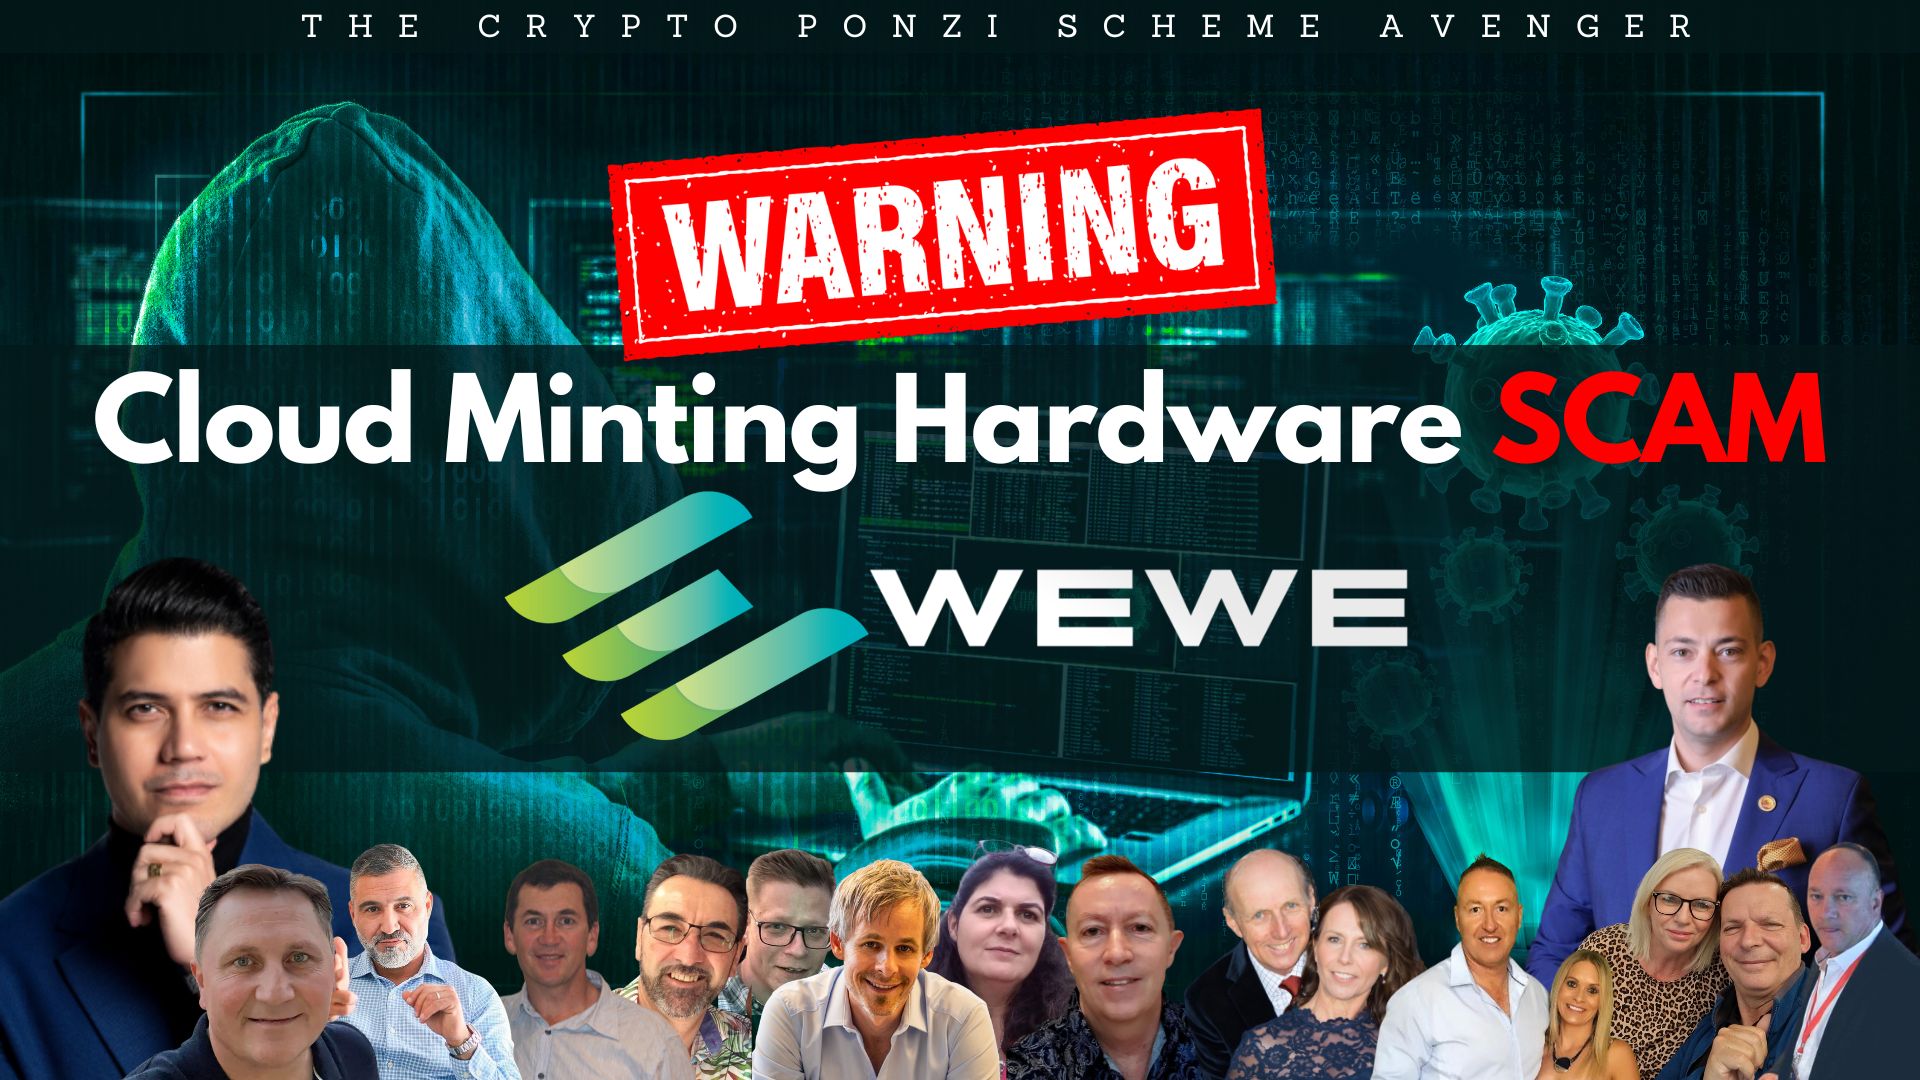 WEWE Global Cloud Minting Scam Beware of Suspicious Emails and the Dangerous Affiliates Behind Them Entrepreneur Decision Maker Connector Podcaster Educator